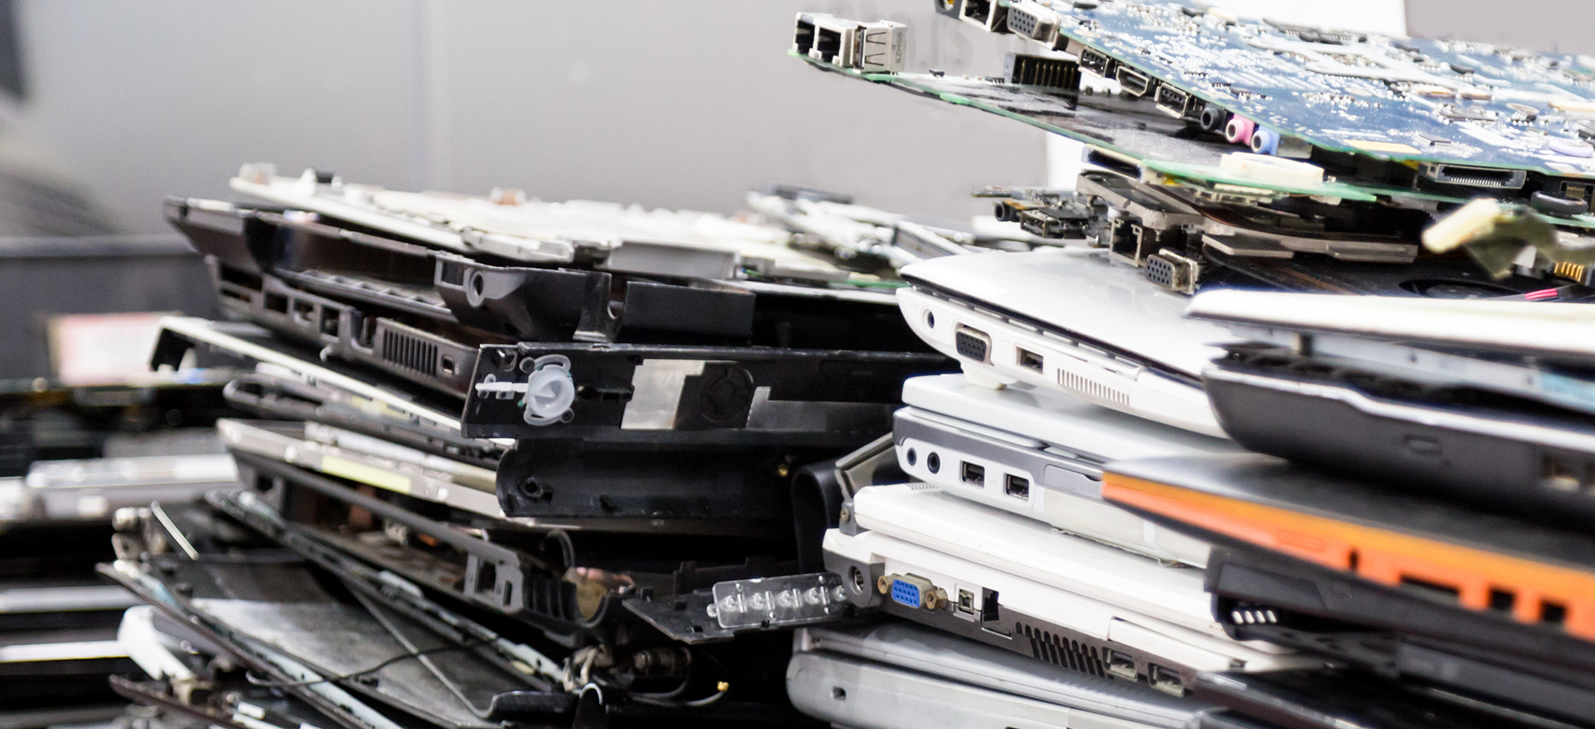 Blog: Achieve Your Sustainability Goals with Responsible IT Asset Disposal